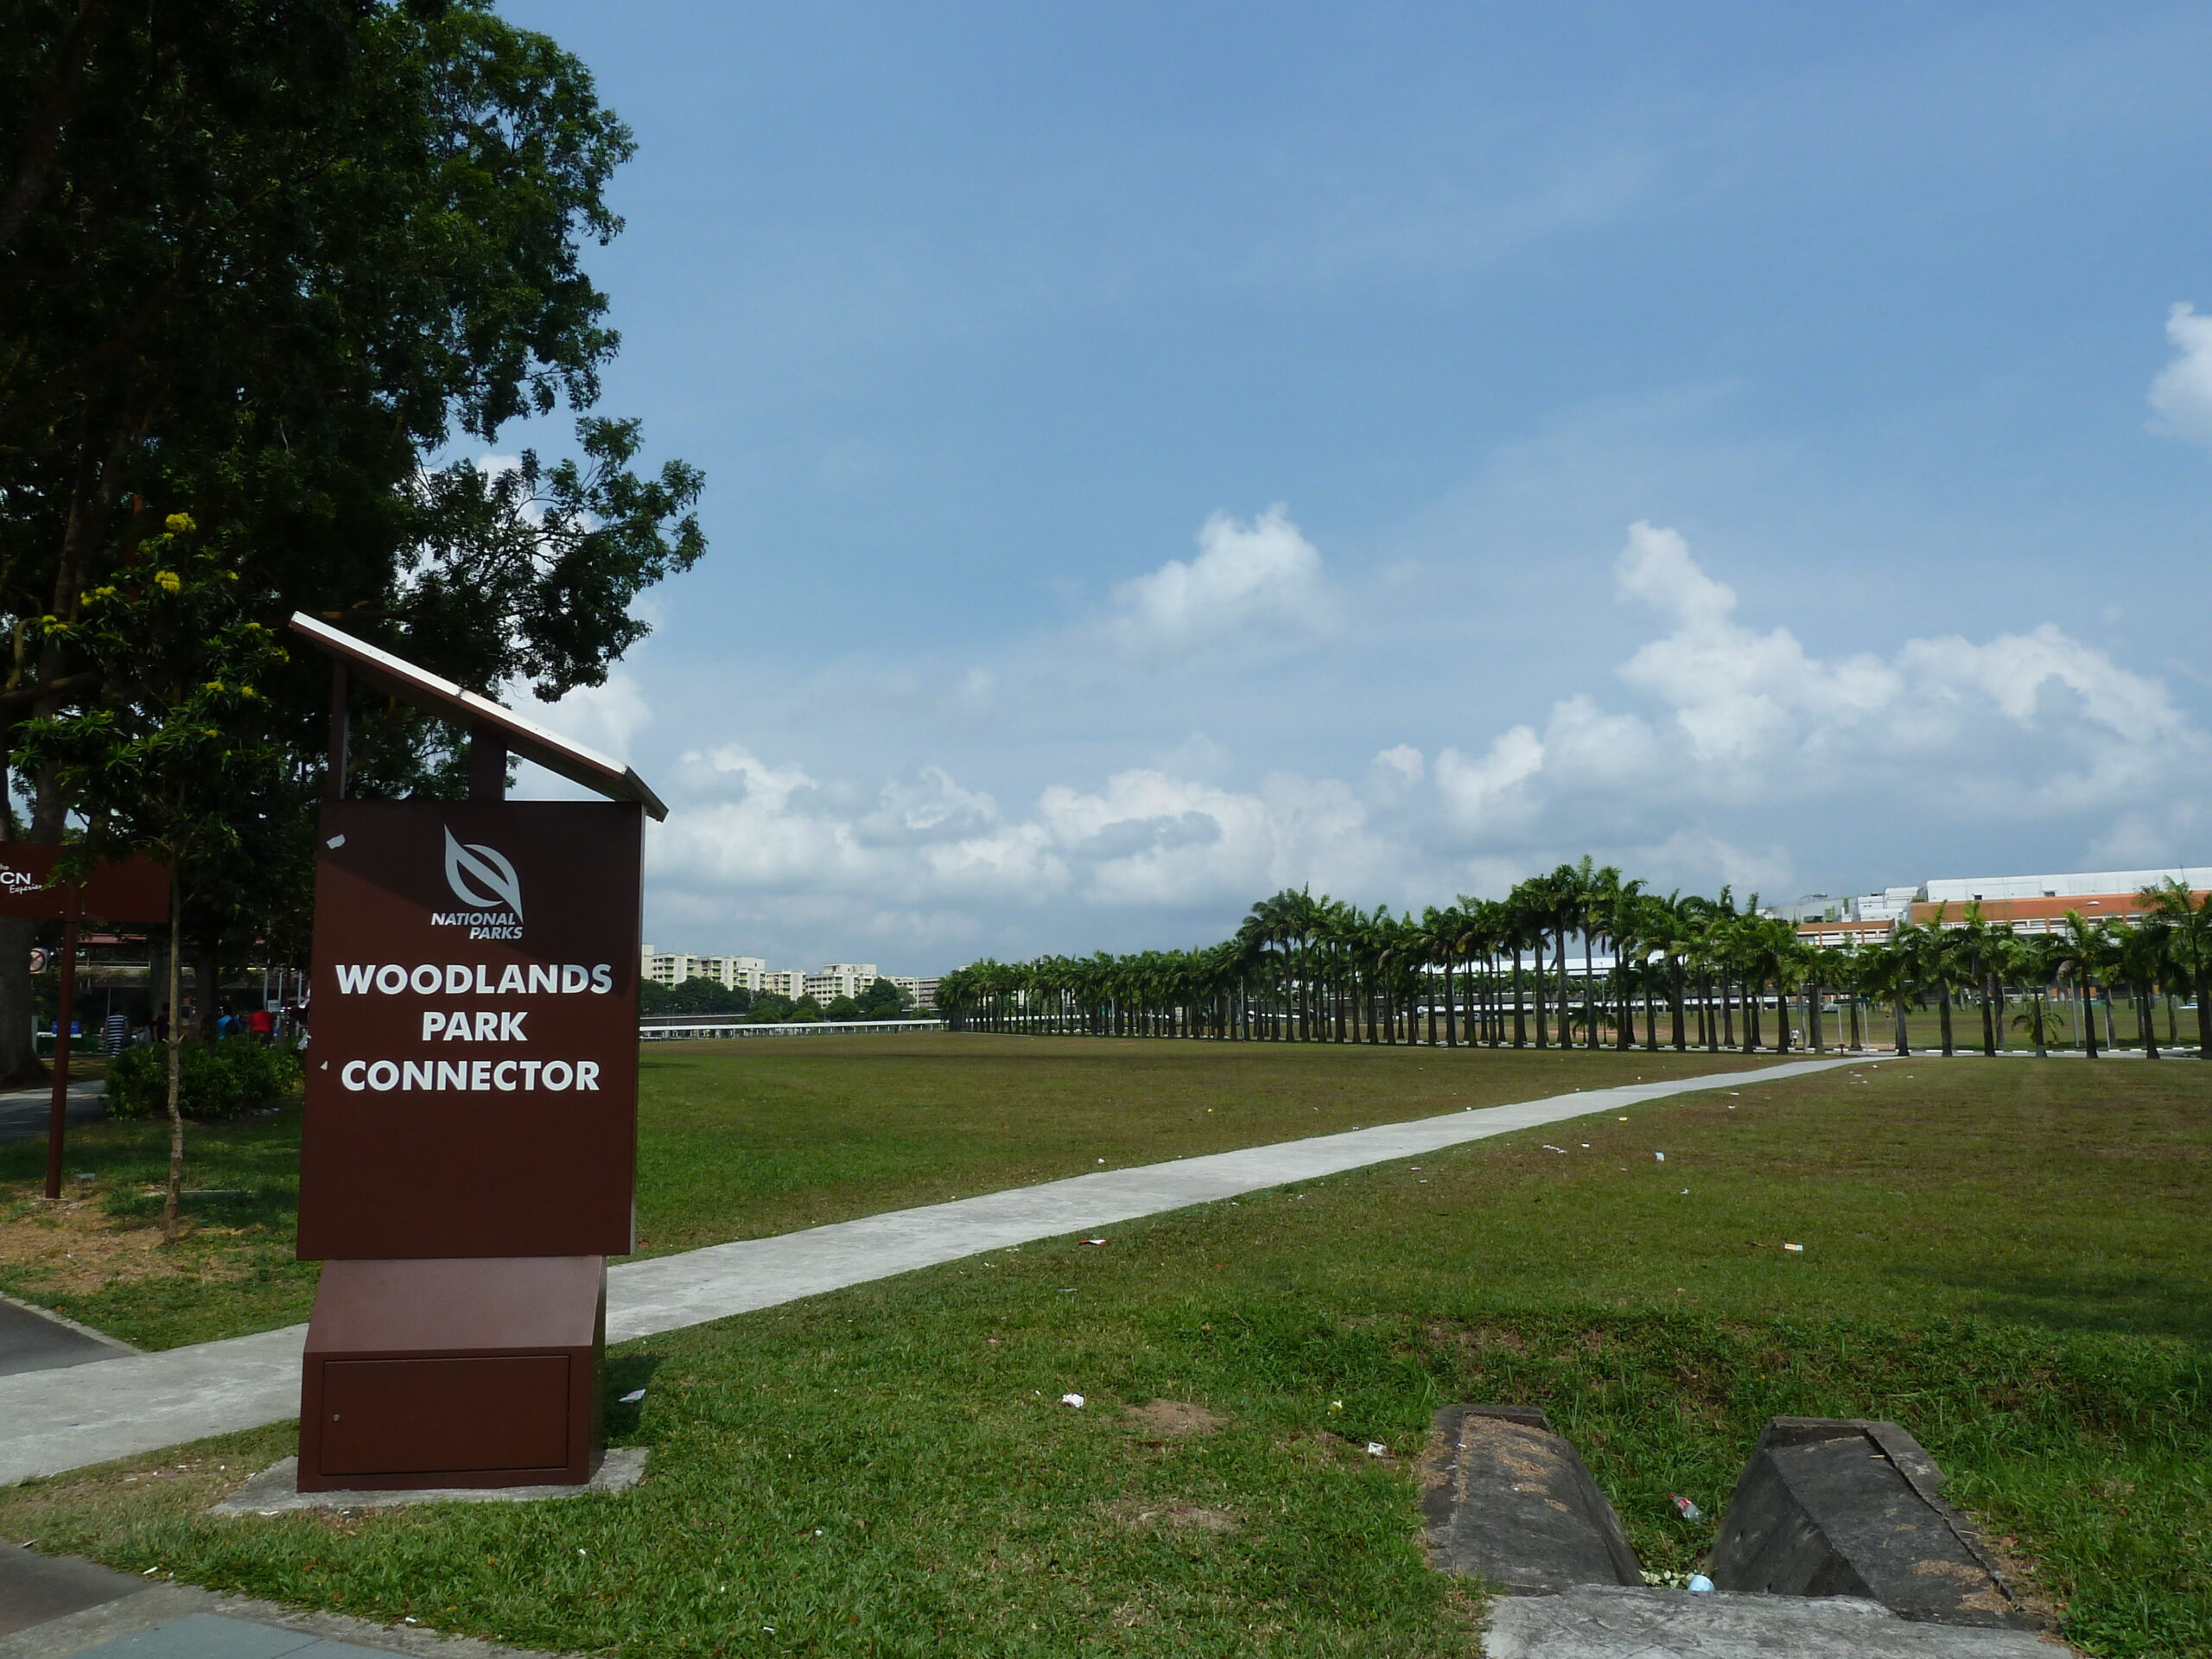 A view of the serene greenery and nature at Woodlands Park Connector